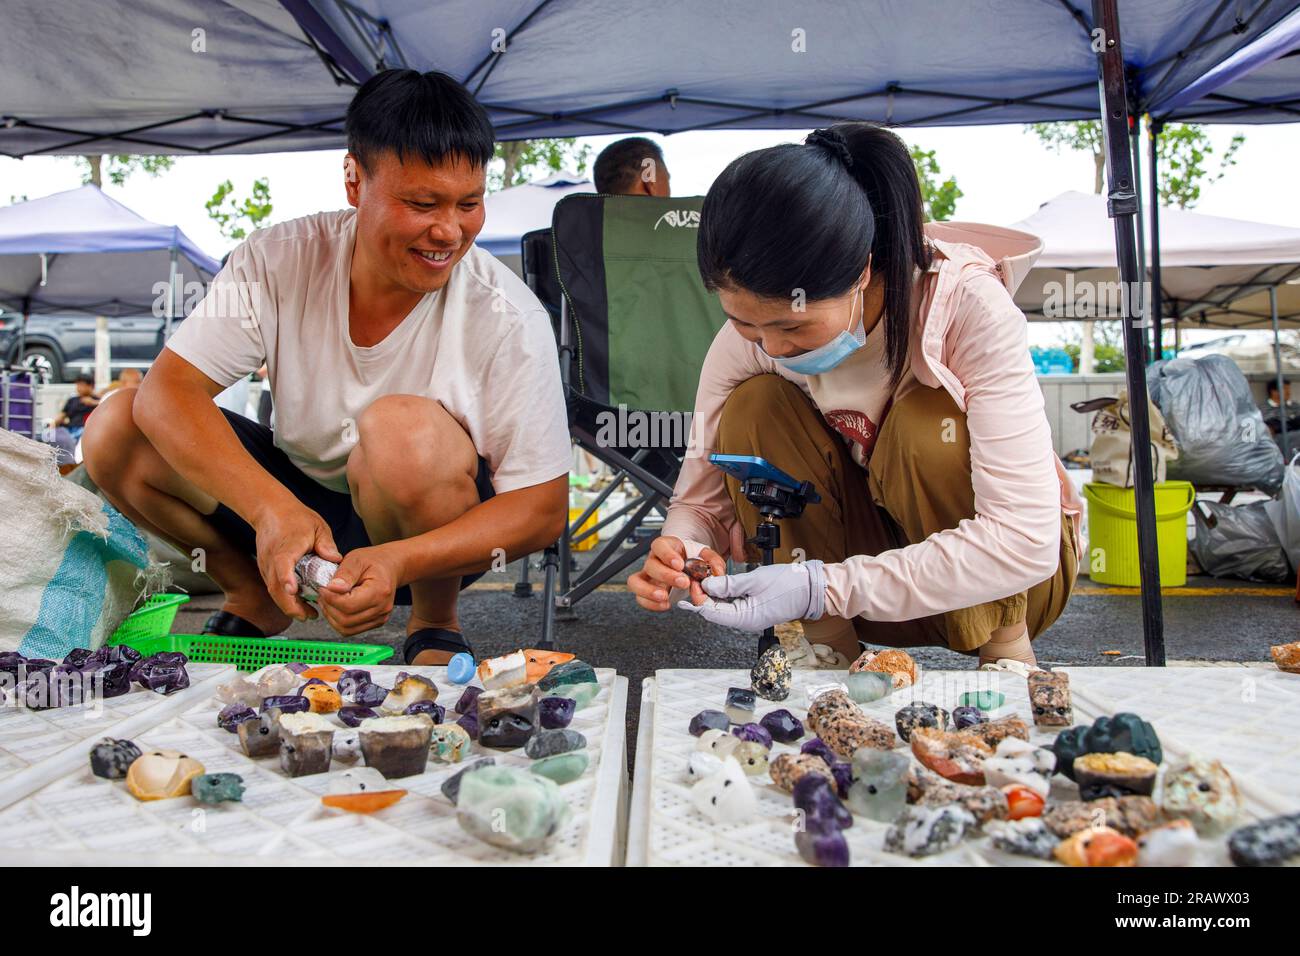 https://c8.alamy.com/comp/2RAWX03/lianyungang-china-july-6-2023-the-crystal-market-is-crowded-in-donghai-county-lianyungang-city-jiangsu-province-china-july-6-2023-the-crystal-collection-can-provide-more-than-3600-ground-stalls-which-are-divided-into-stone-ball-area-basin-pendante-area-carved-parts-area-and-bracelet-semi-finished-products-area-it-is-understood-that-donghai-county-is-known-as-the-crystal-capital-of-the-world-the-donghai-crystal-has-been-approved-by-the-national-geographic-indication-protection-products-with-a-number-of-crystal-crystal-products-based-on-the-open-air-collection-become-a-usef-2RAWX03.jpg